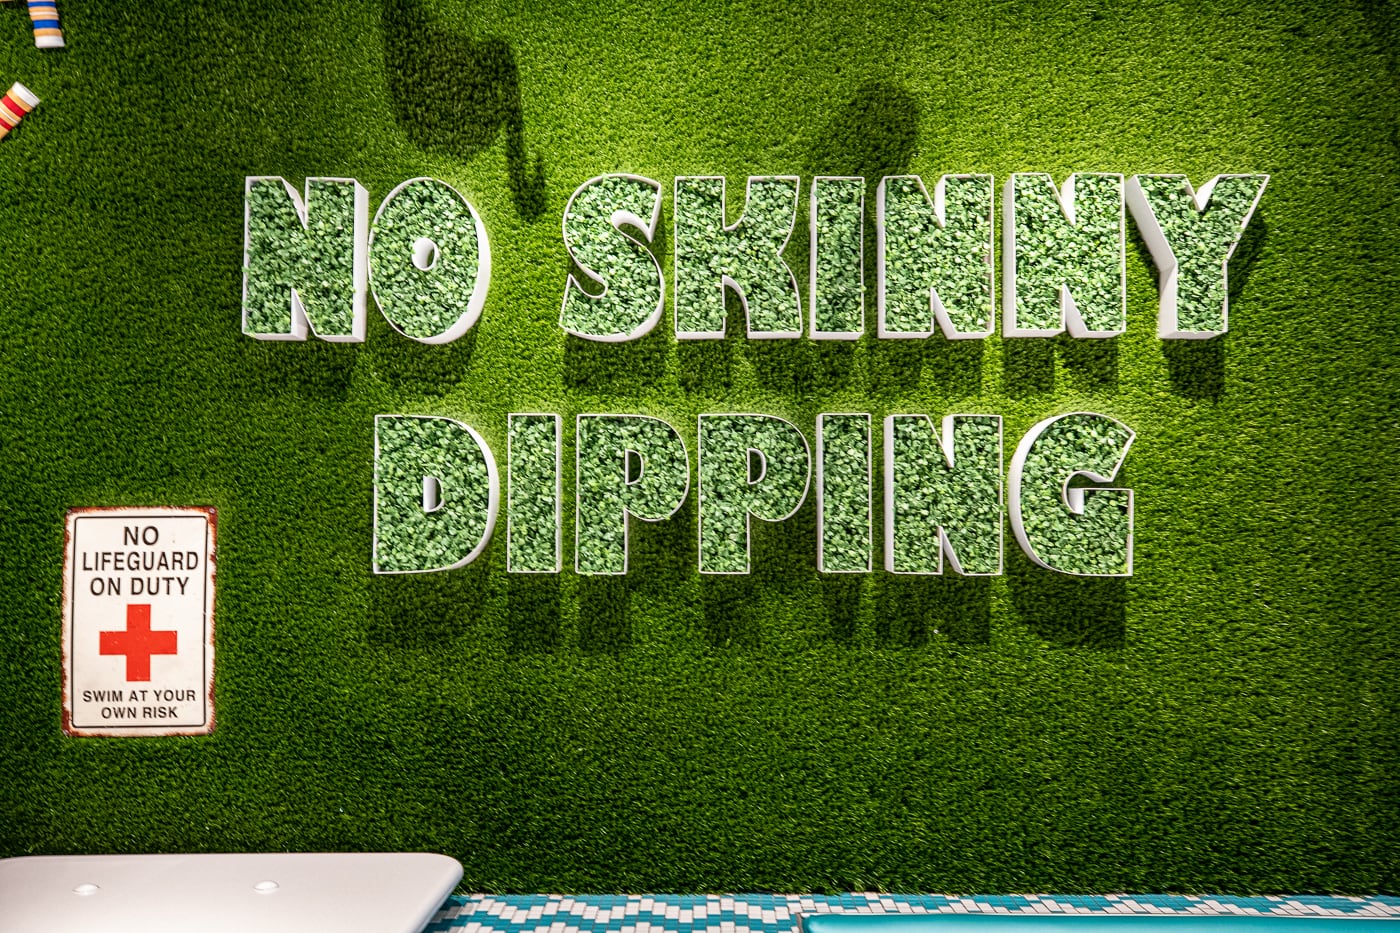 No Skinny Dipping Sign at The Curtis Hotel - a Themed Hotel in Denver, Colorado